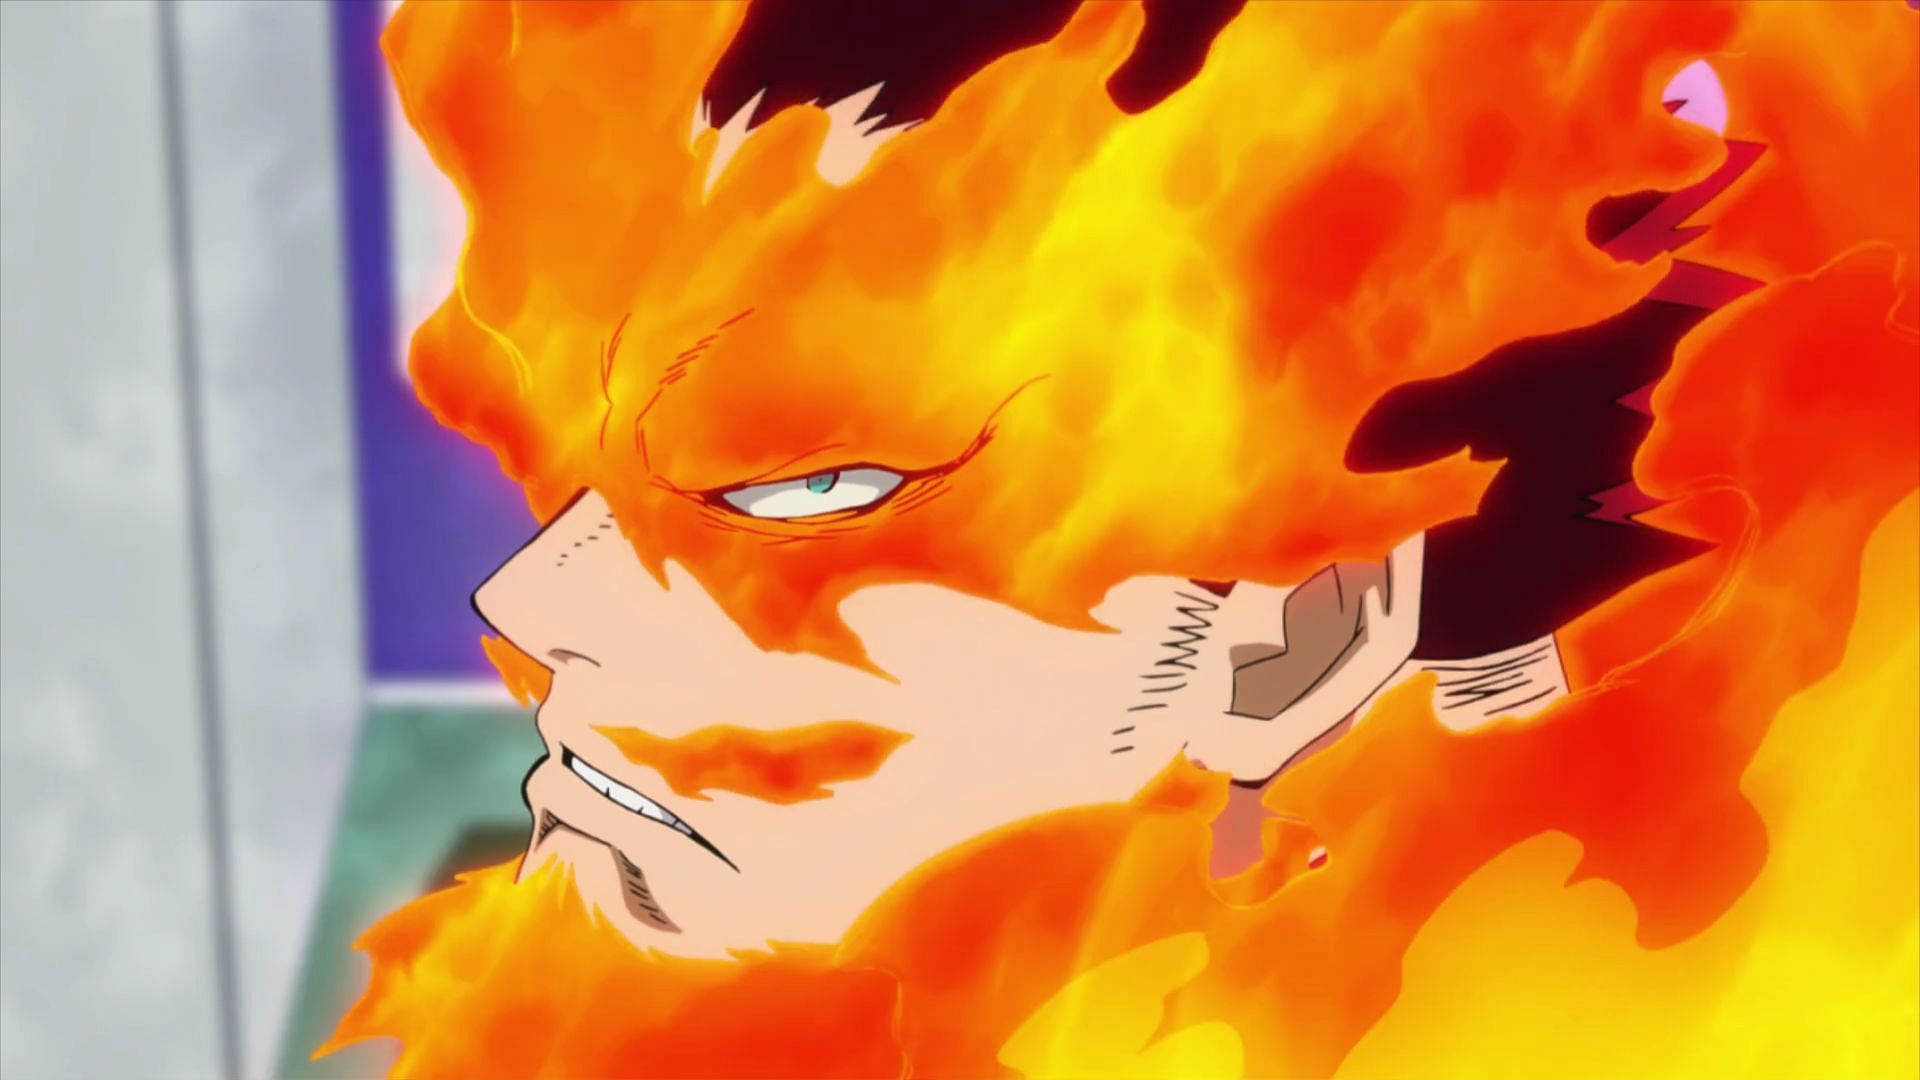 Endeavor became the number one hero after All Might (Image via Bones)